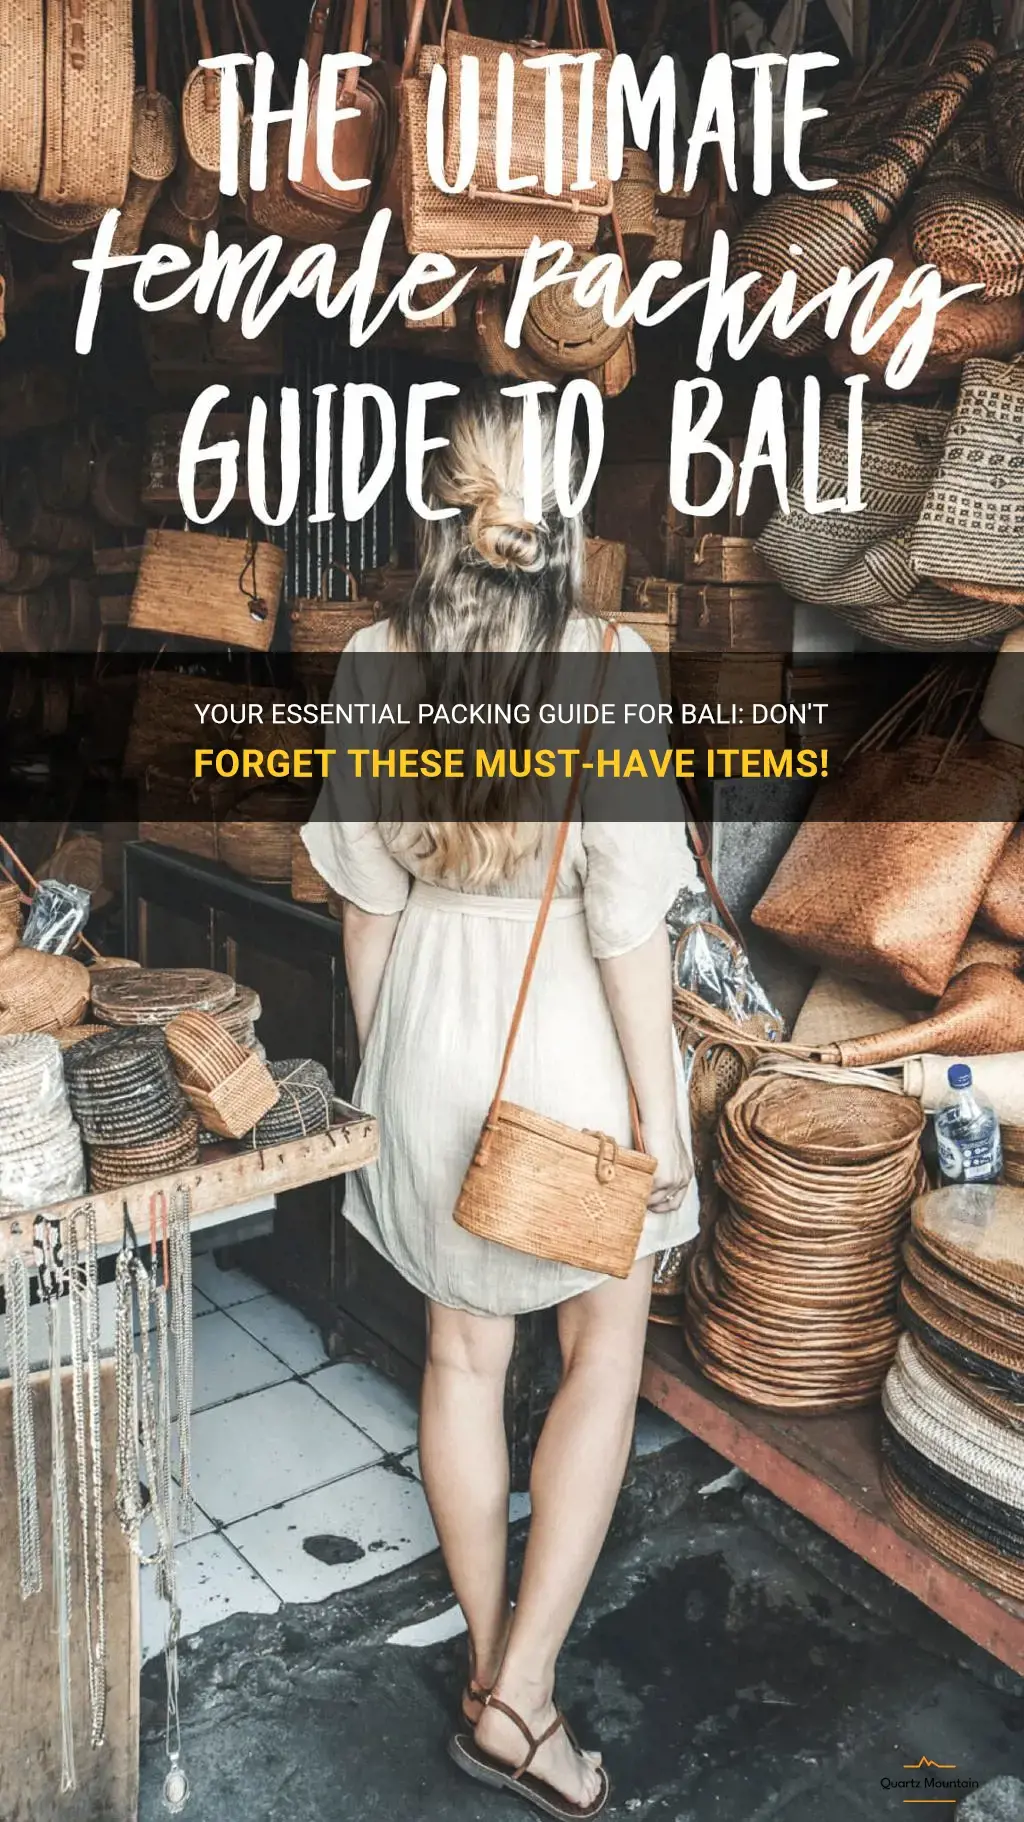 what do I need to pack for bali